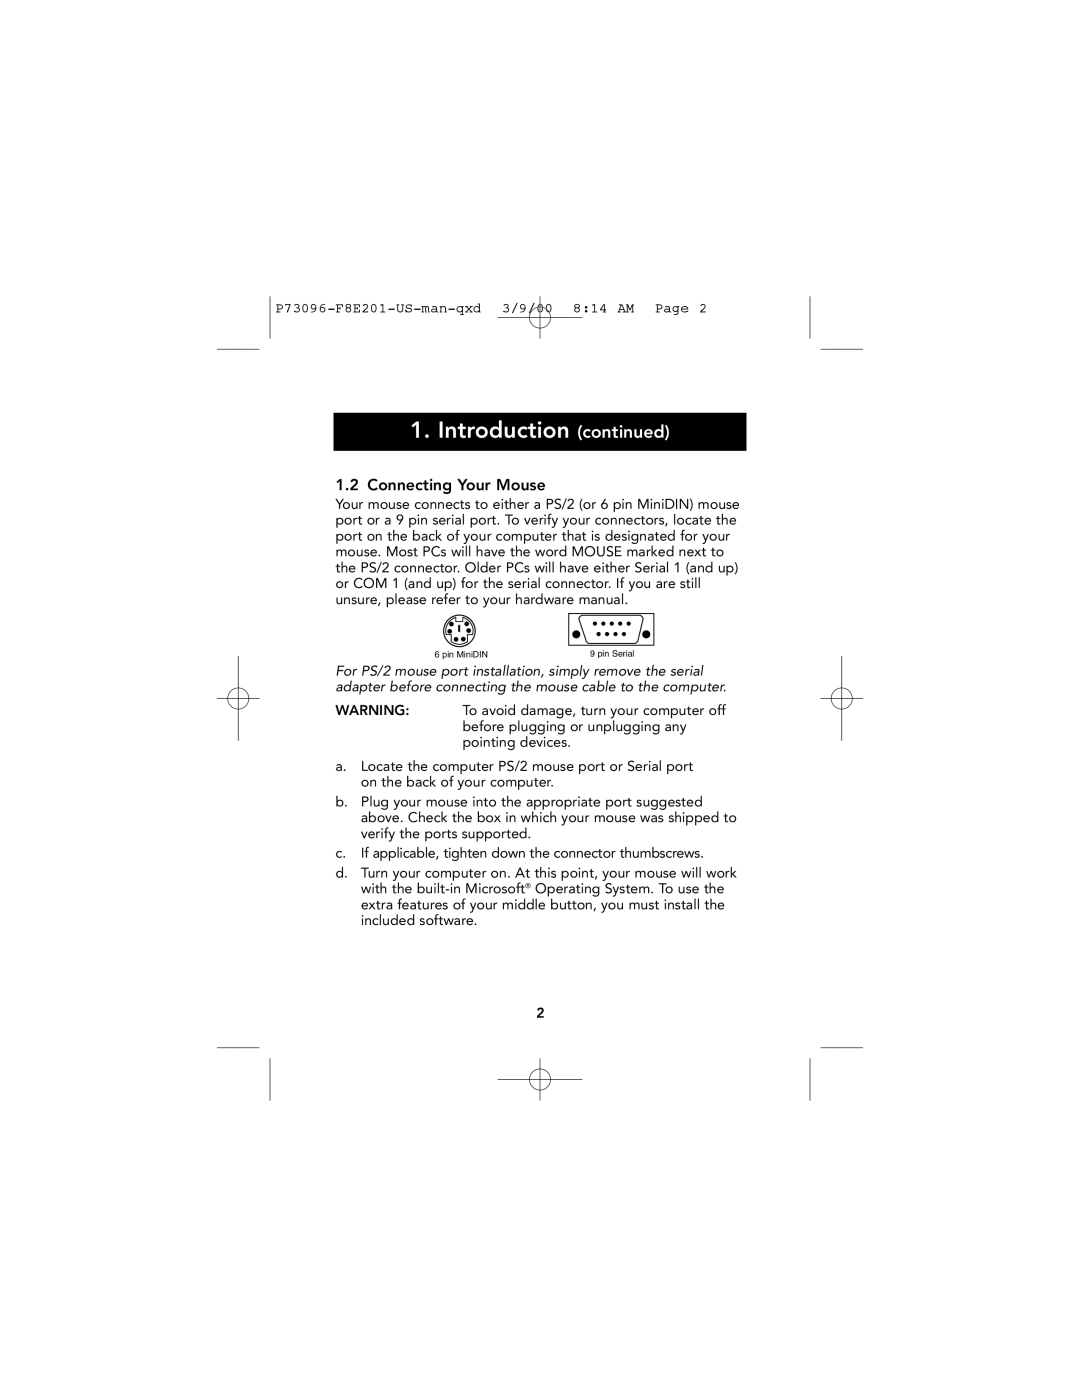 Belkin F8E201-BLK, P73096 user manual Introduction continued, Connecting Your Mouse 